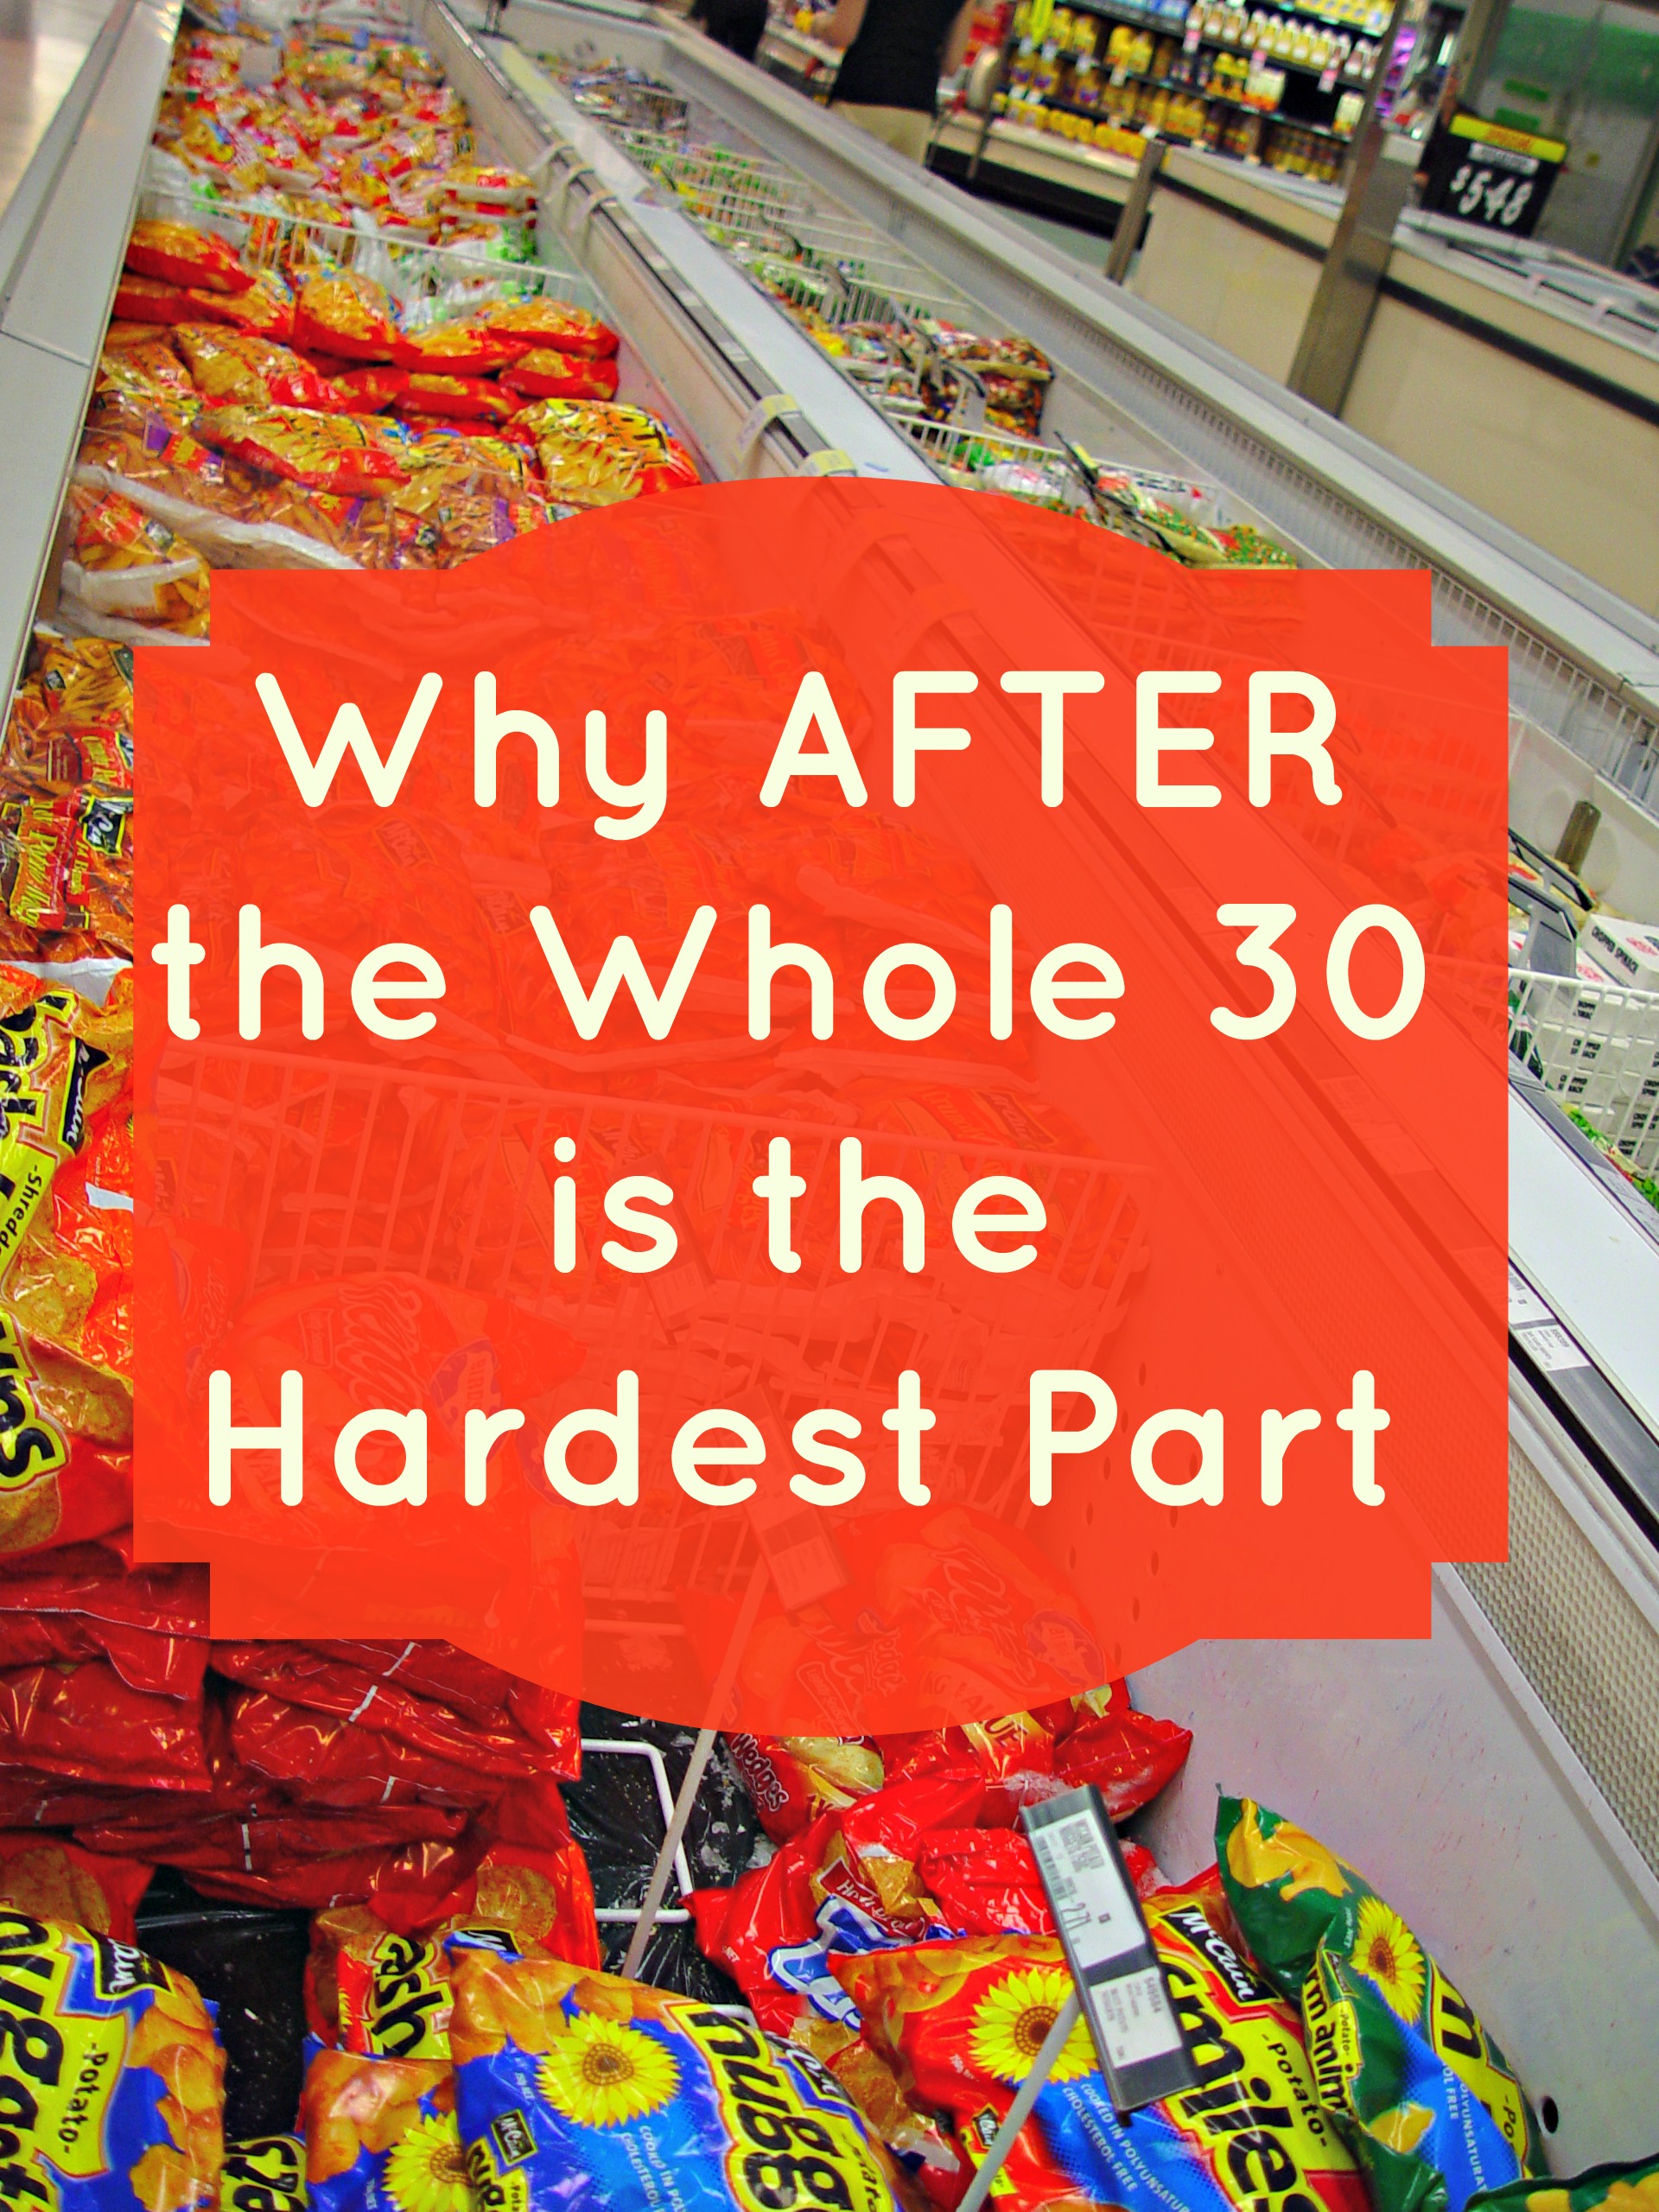 Why After the Whole 30 is the Hardest Part